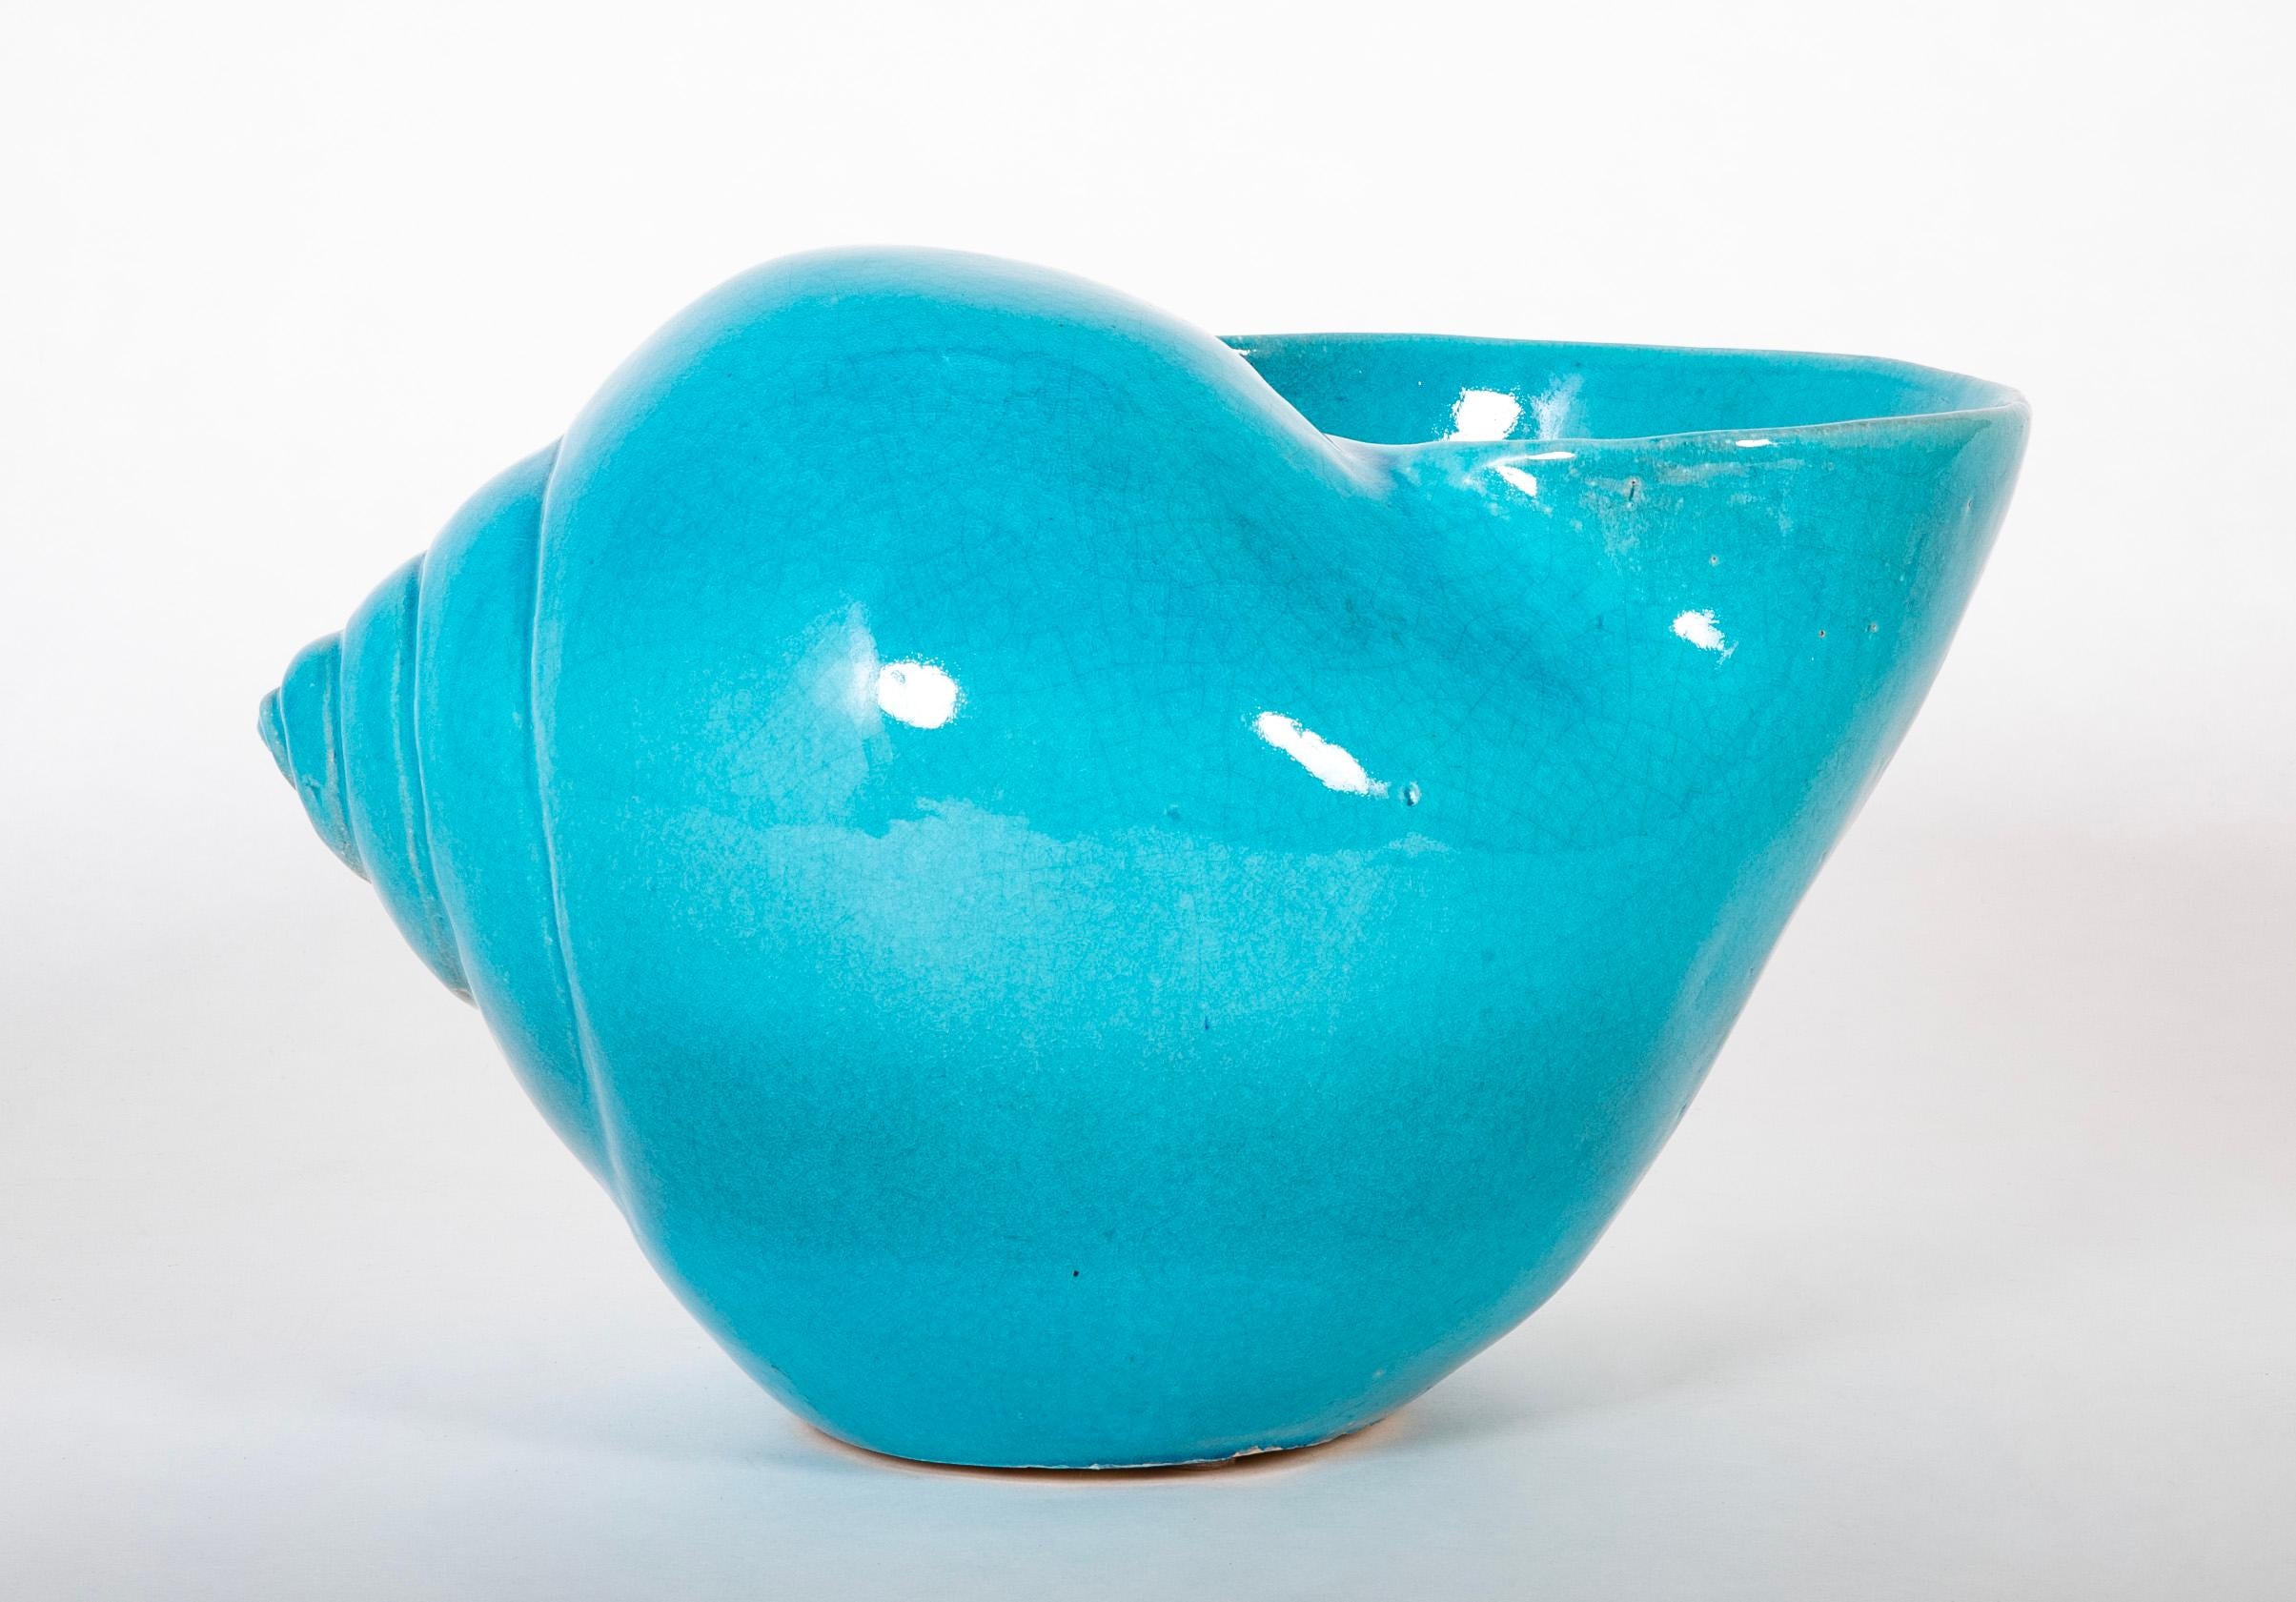 Turquoise Blue Glazed Sea Shell Vase Jardiniere Planter, Large Scale In Good Condition For Sale In Stamford, CT